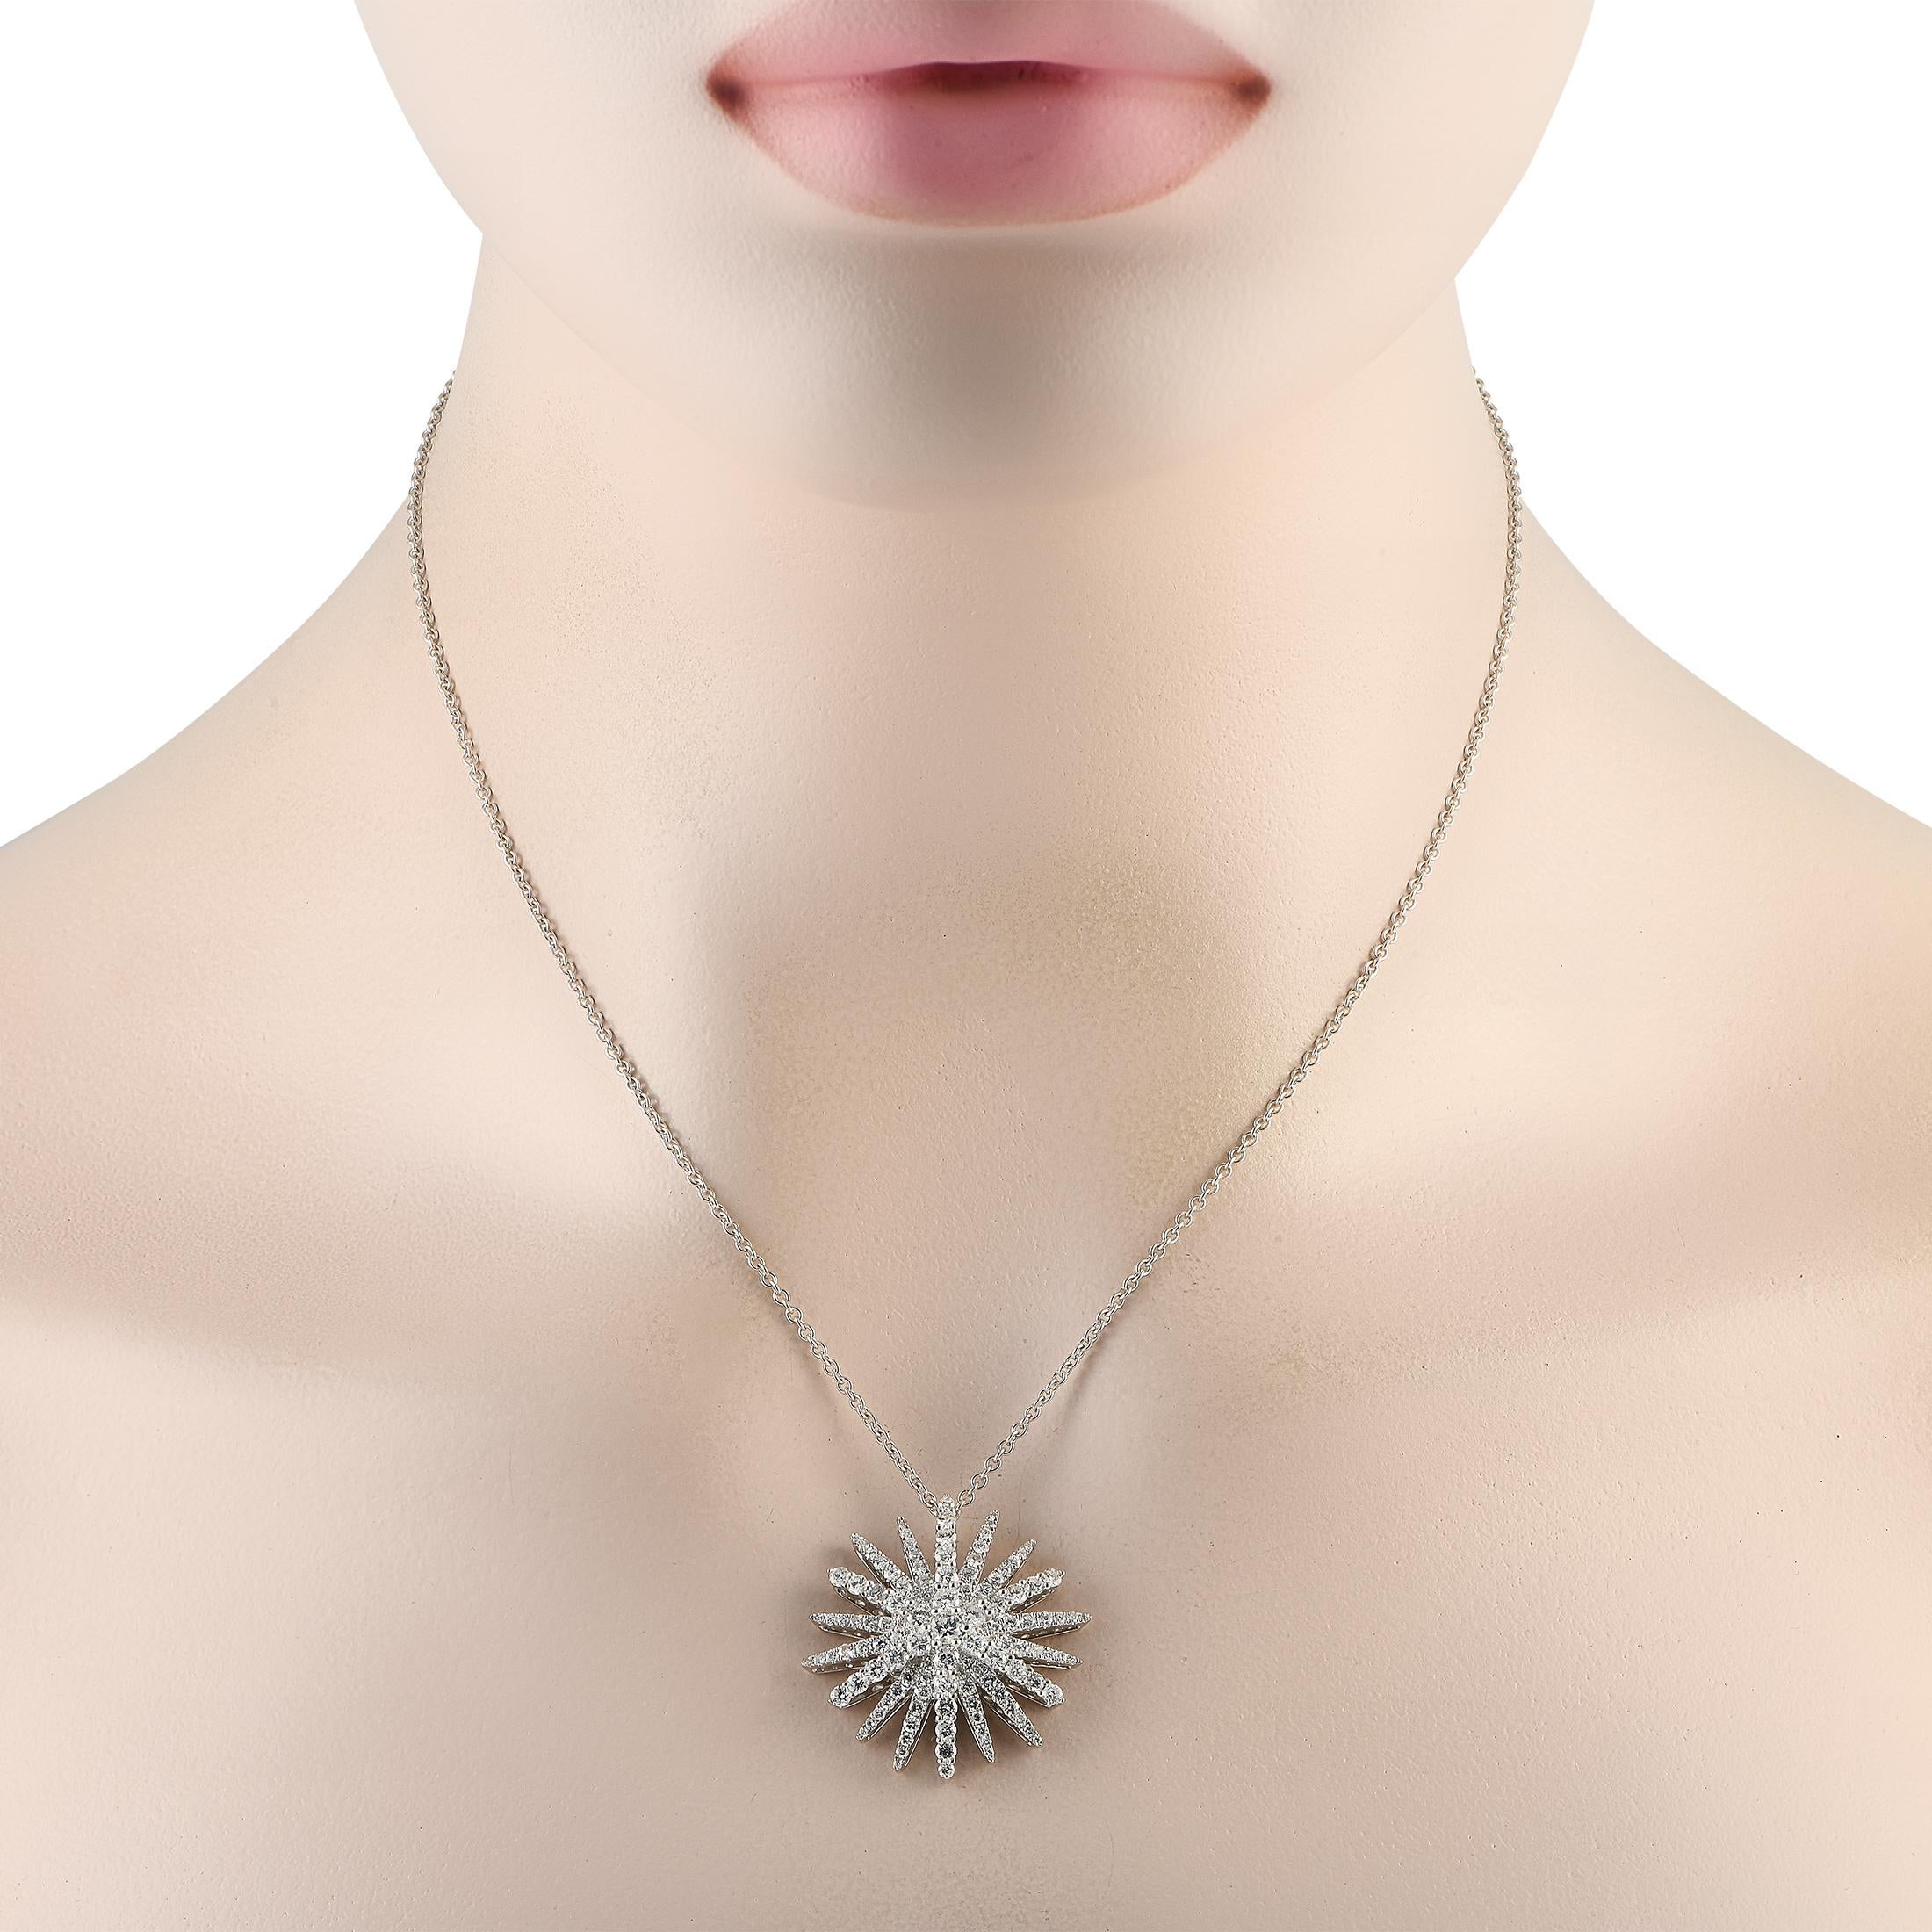 Here is a shiny, sparkly sunburst necklace to celebrate the ray of sunshine that she is. This necklace makes a fantastic special occasion gift. It features a white gold chain holding a 1.15-wide pendant in sun motif. The 18K white gold pendant